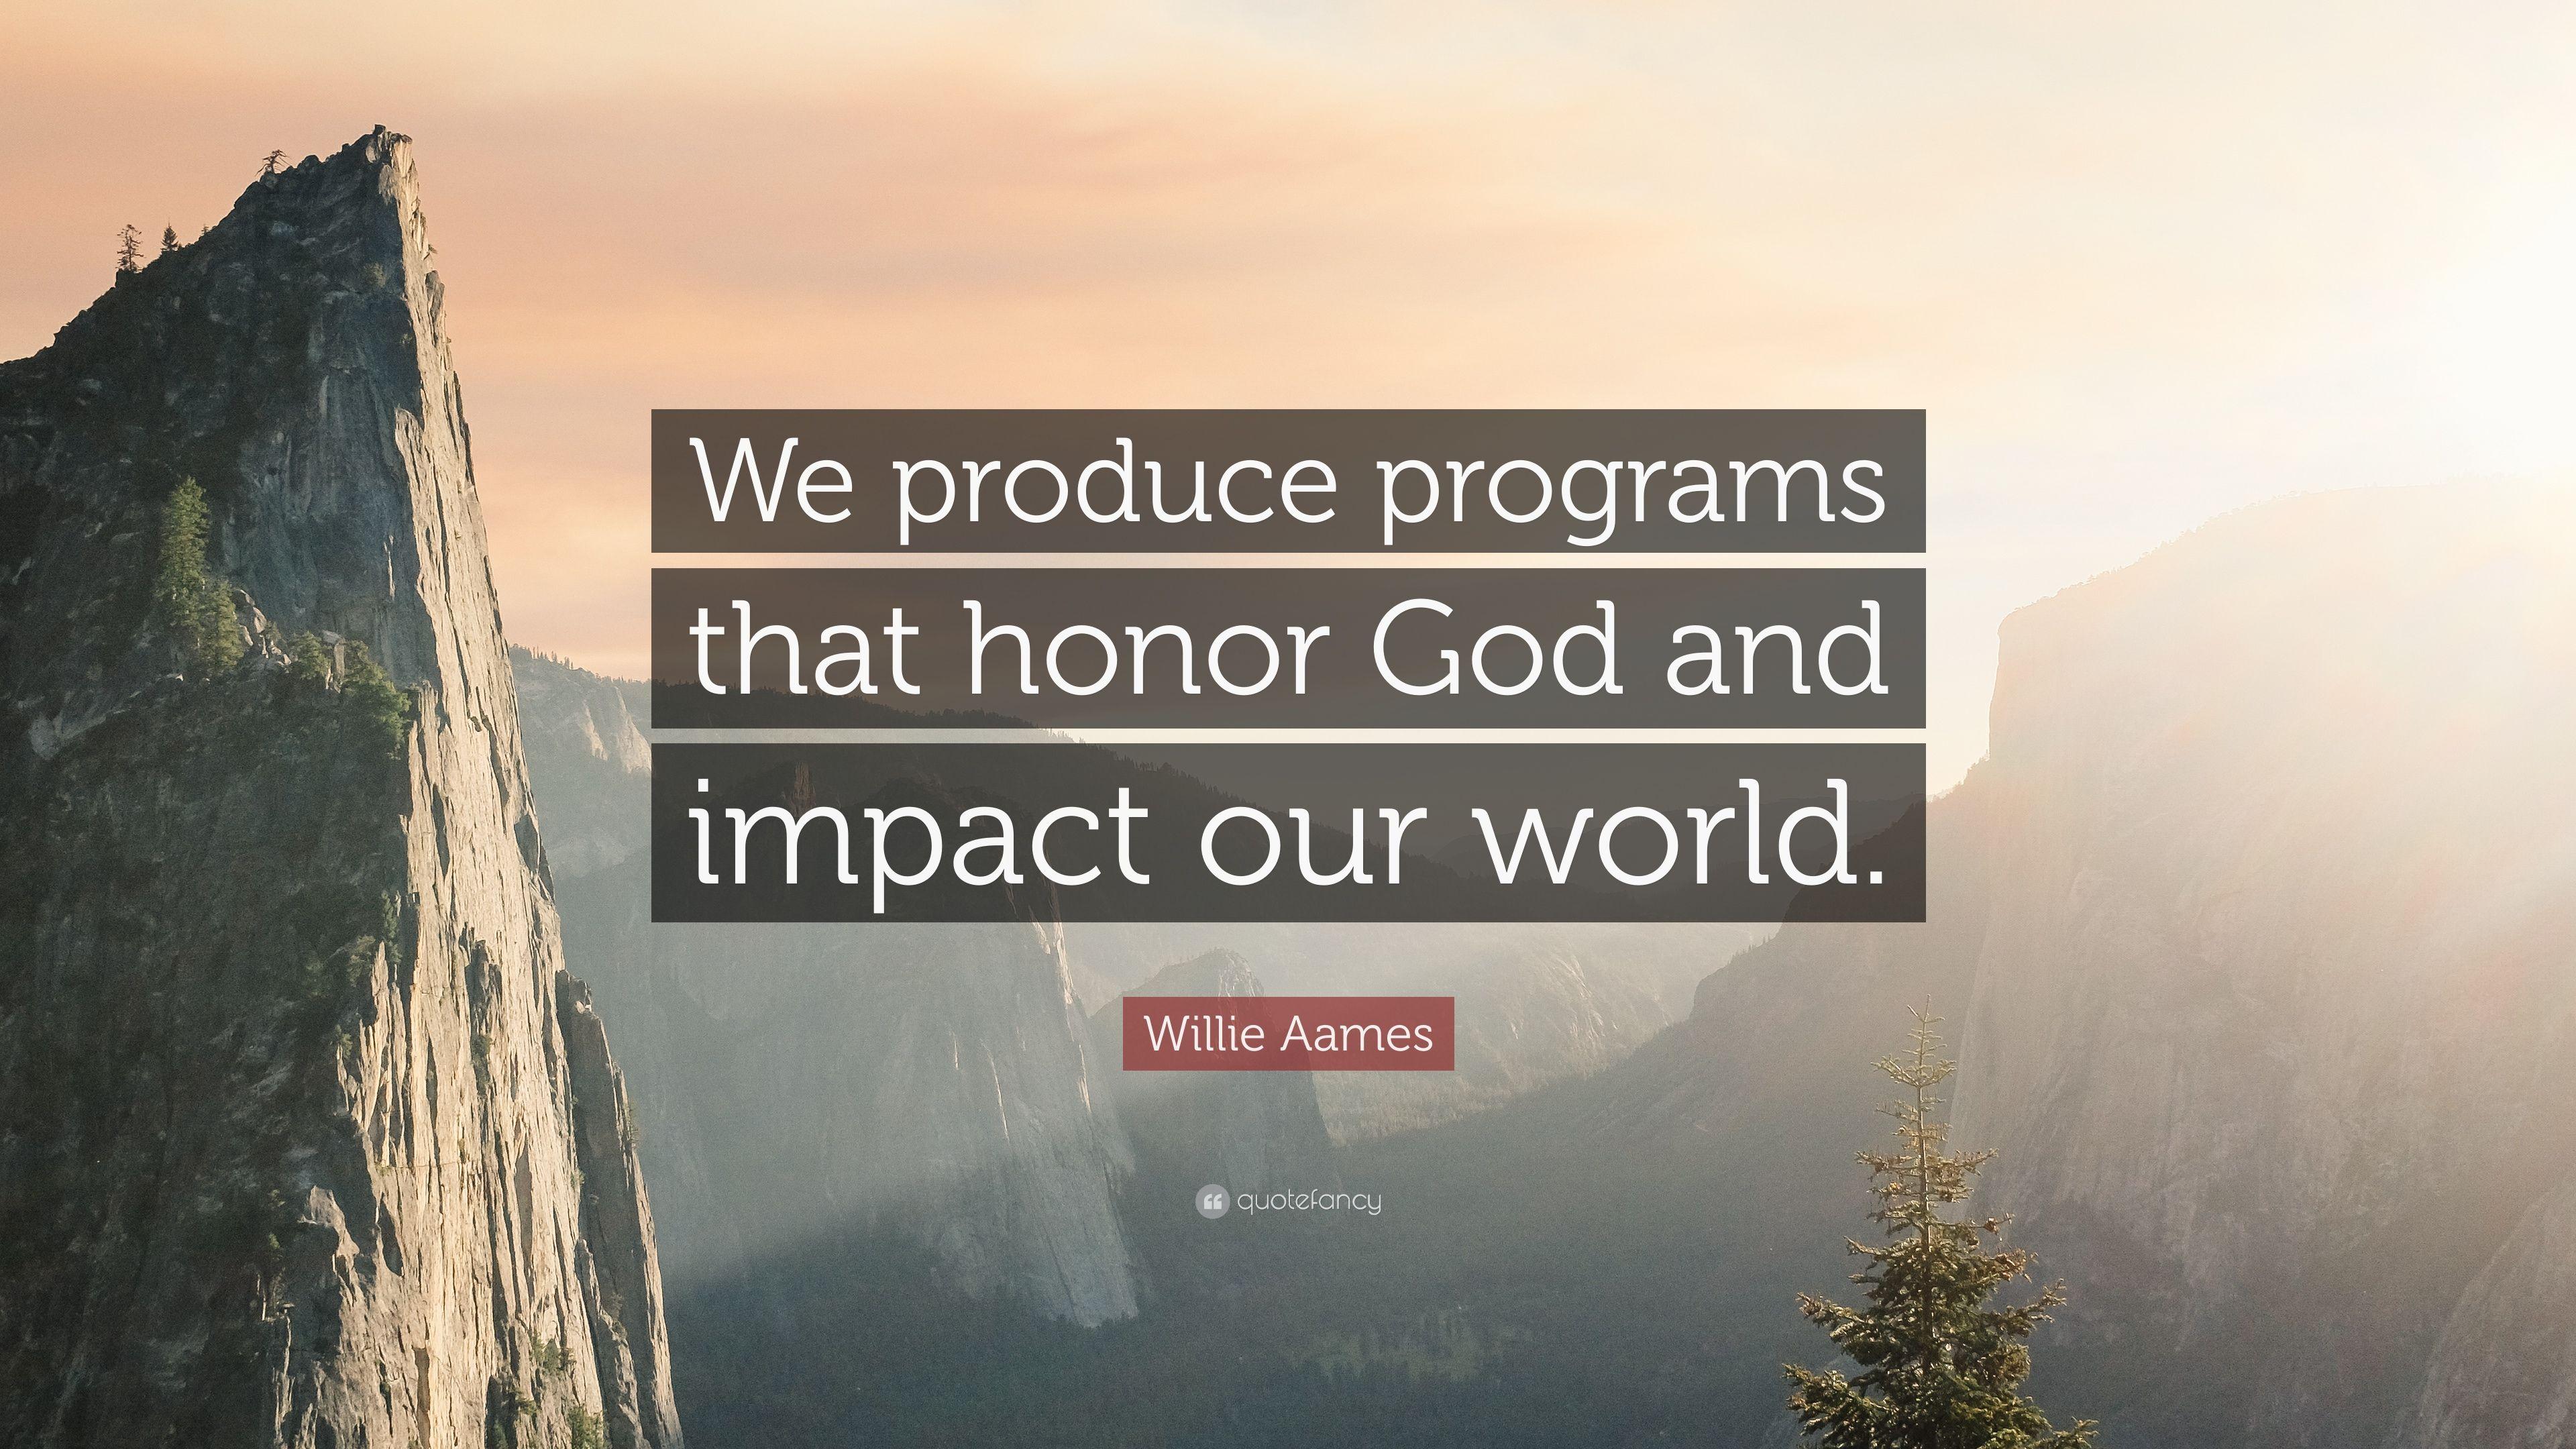 Willie Aames Quote: “We produce programs that honor God and impact